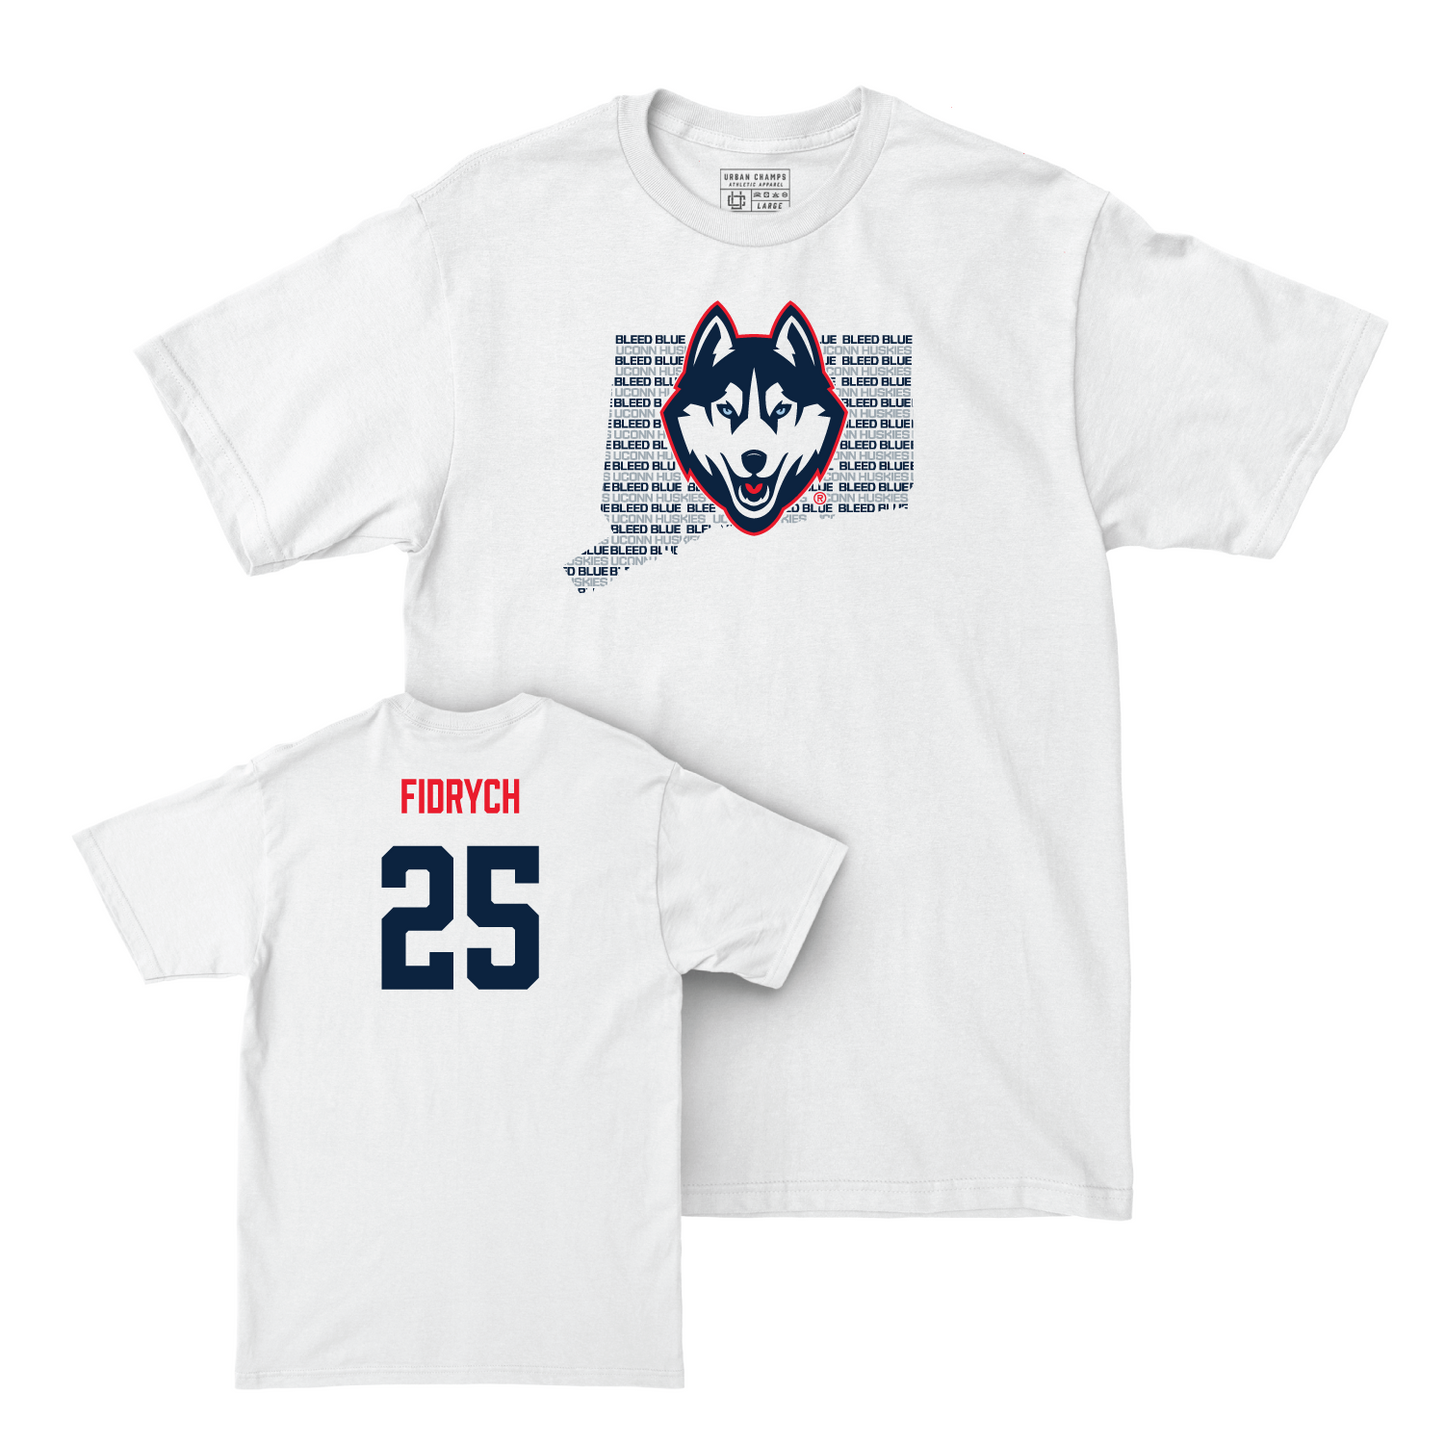 White Men's Soccer Bleed Blue Comfort Colors Tee Small / Tyler Fidrych | #25